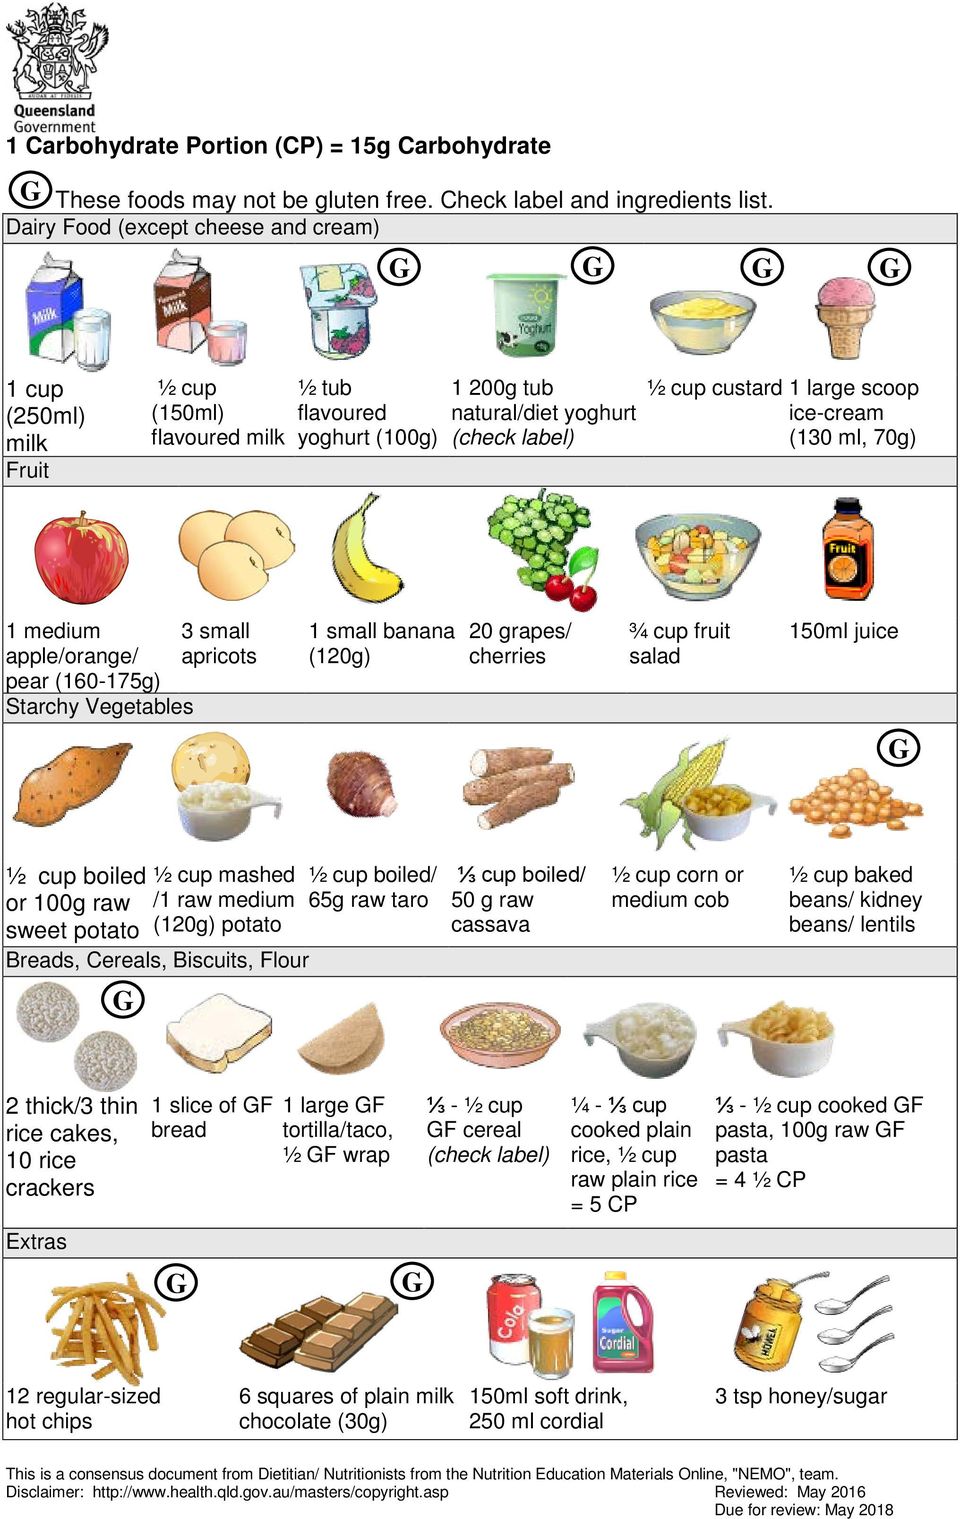 ice-cream (130 ml, 70g) 1 medium apple/orange/ pear (160-175g) Starchy Vegetables 3 small apricots 1 small banana (120g) 20 grapes/ cherries ¾ cup fruit salad 150ml juice ½ cup boiled ½ cup mashed or